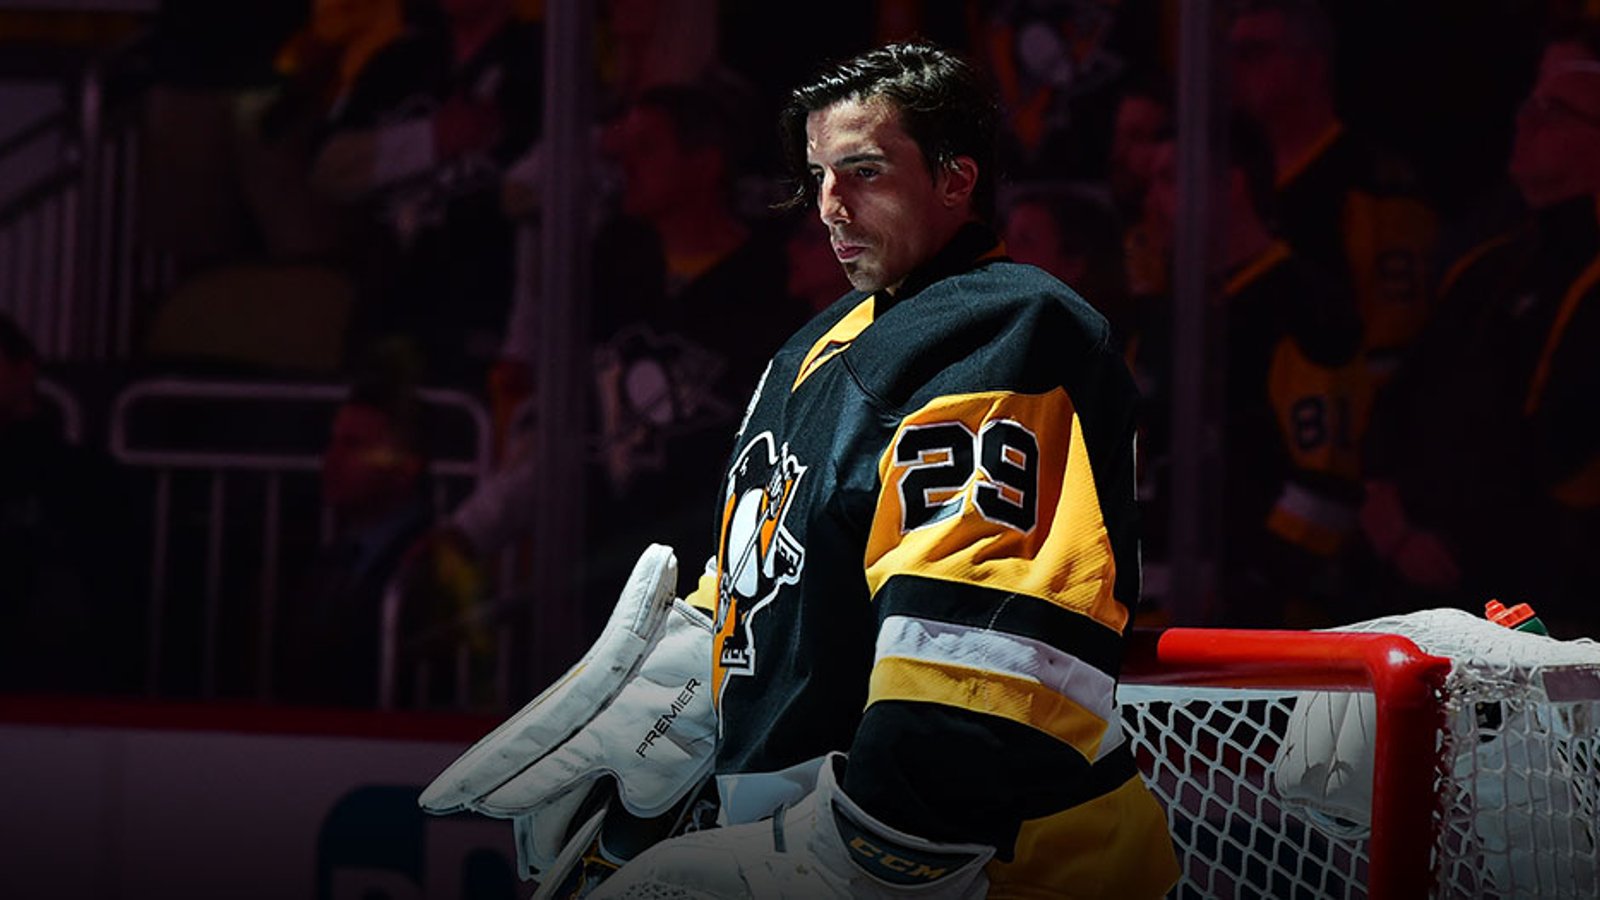 Unexpected move from Vegas and Fleury for tonight’s NHL Expansion Draft.